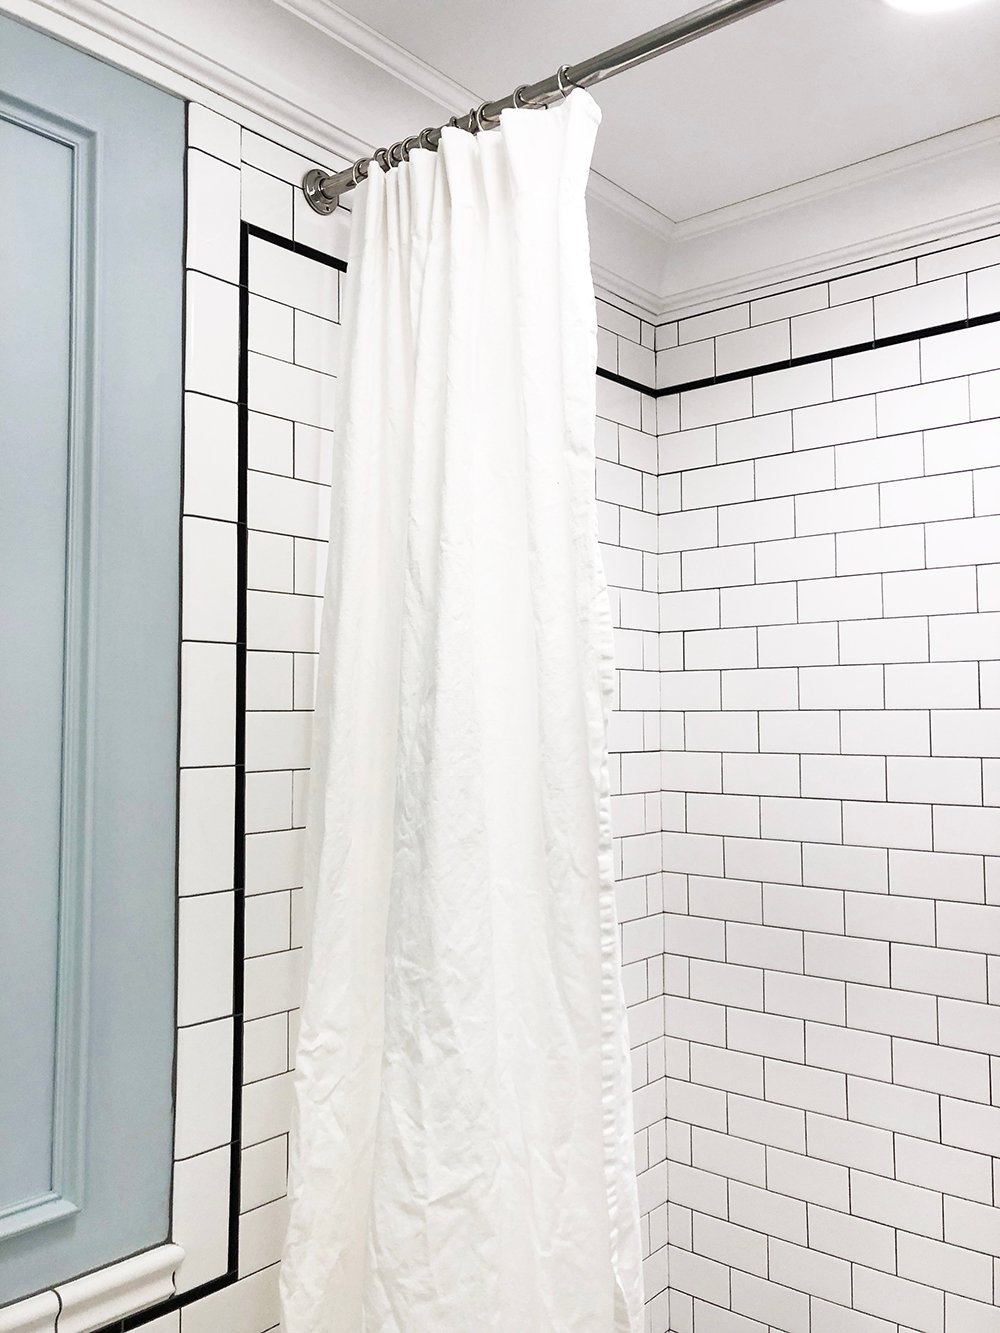 Diy Extra Long Shower Curtain Using Ikea Curtains Room For Tuesday